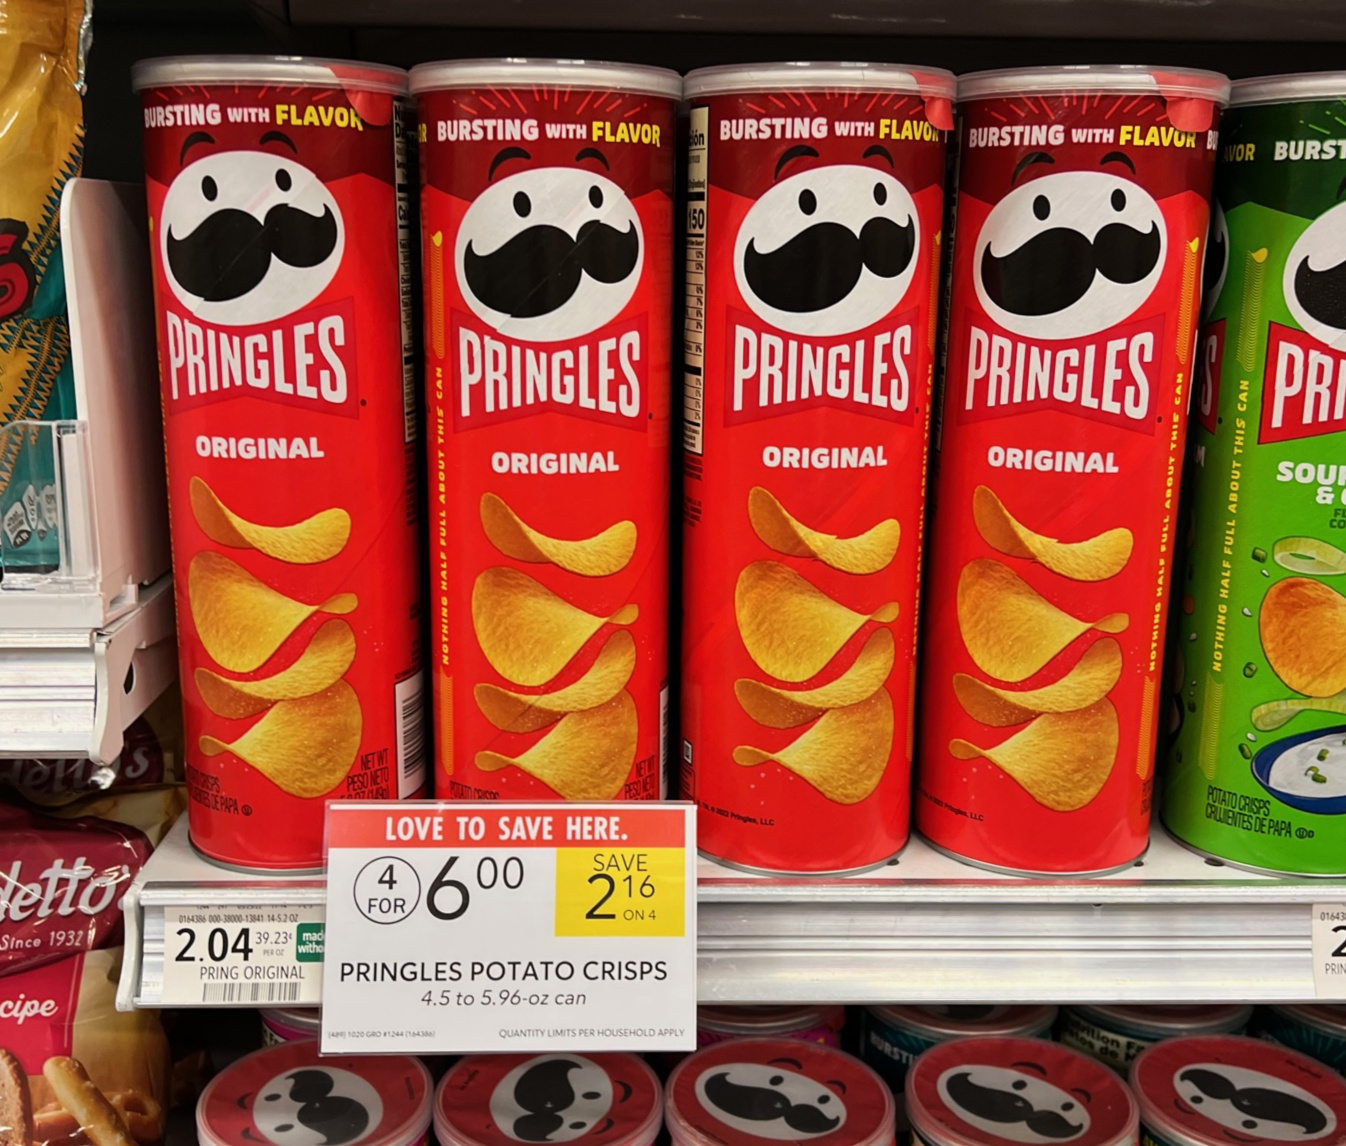 Get Cans Of Pringles Potato Crisps For Just $1.30 Each - iHeartPublix